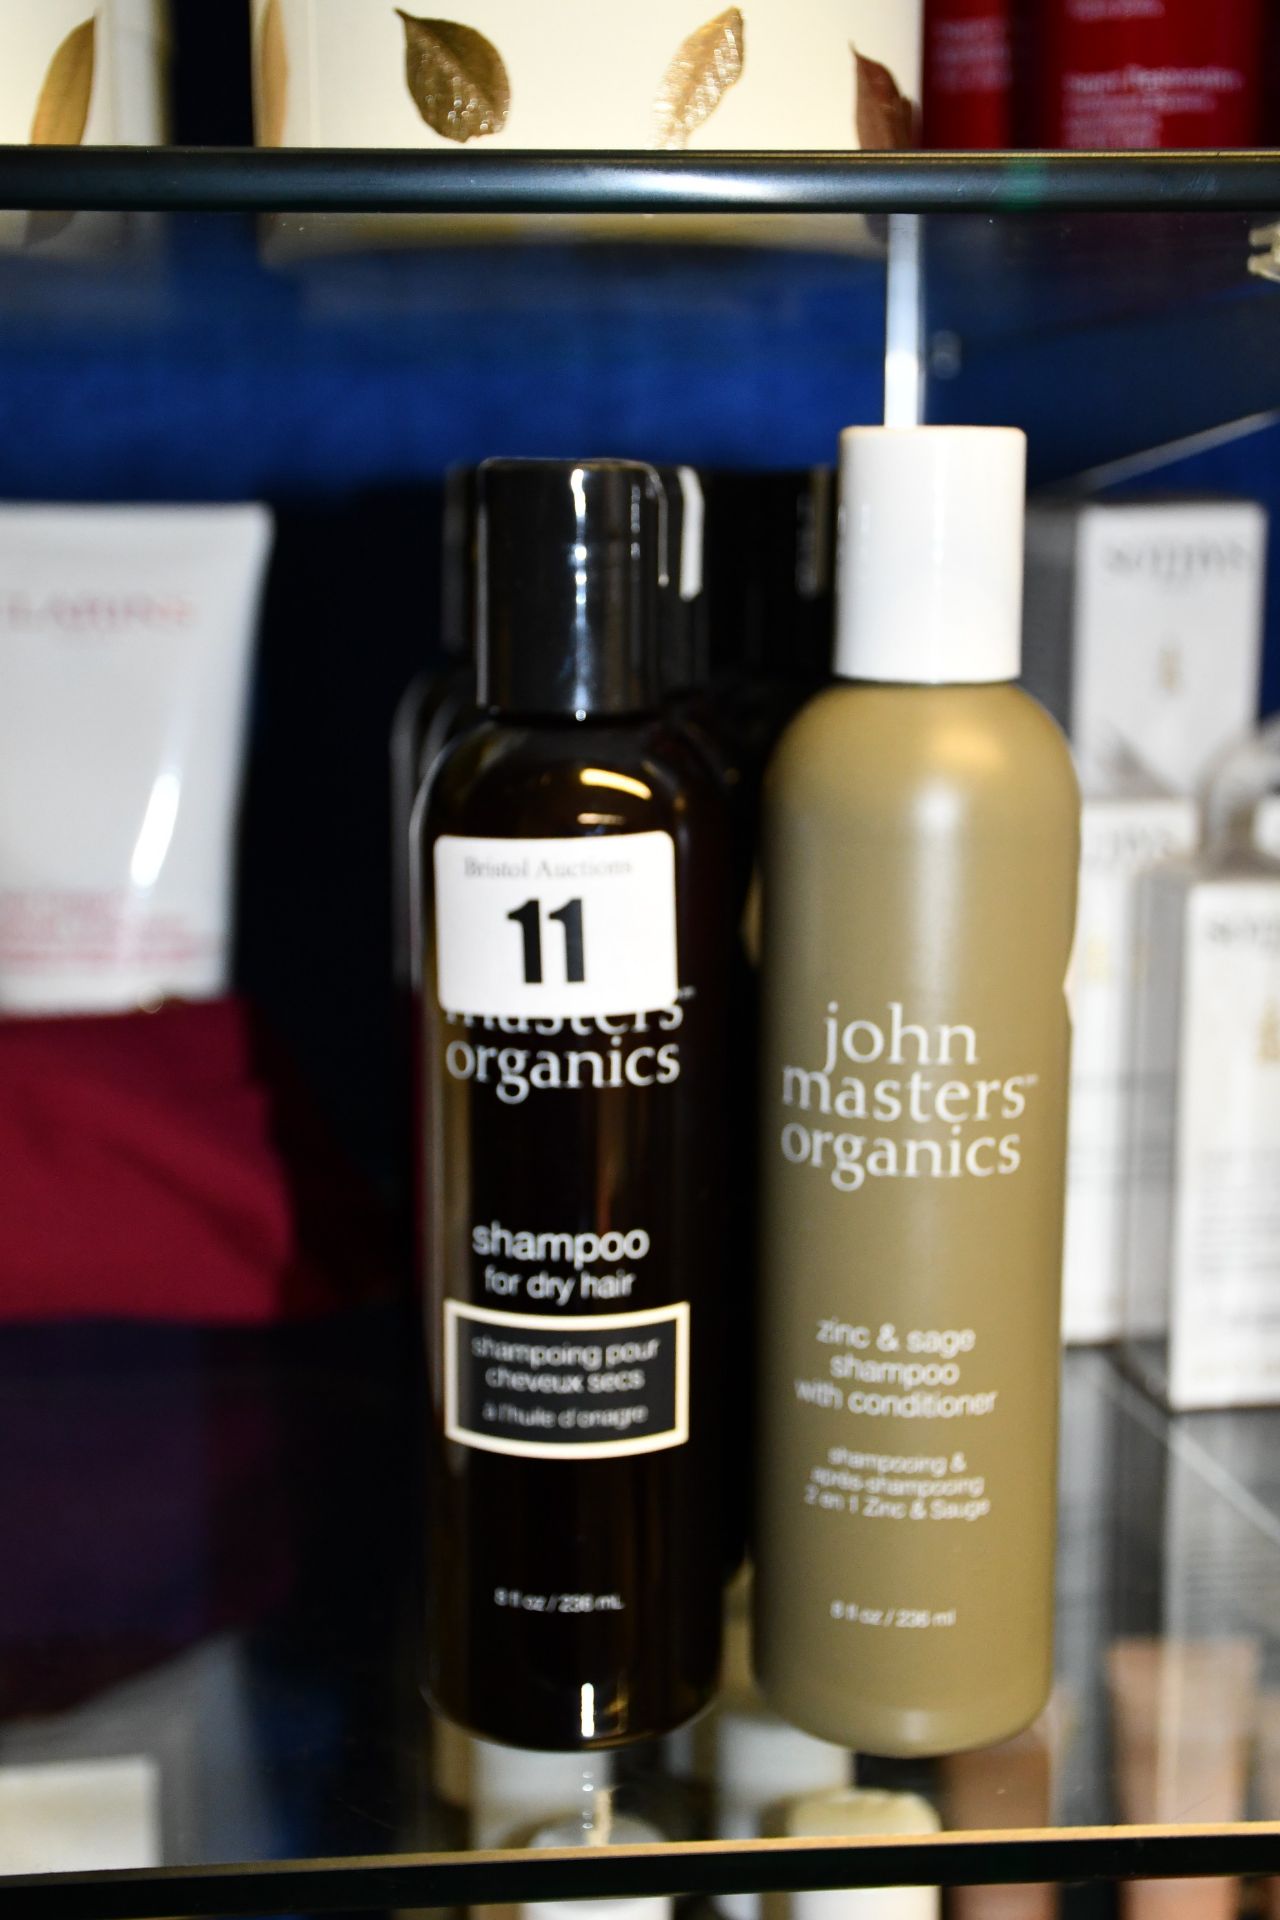 Nine bottles of as new John Masters Organics shampoo for dry hair (236ml) and one bottle of as new